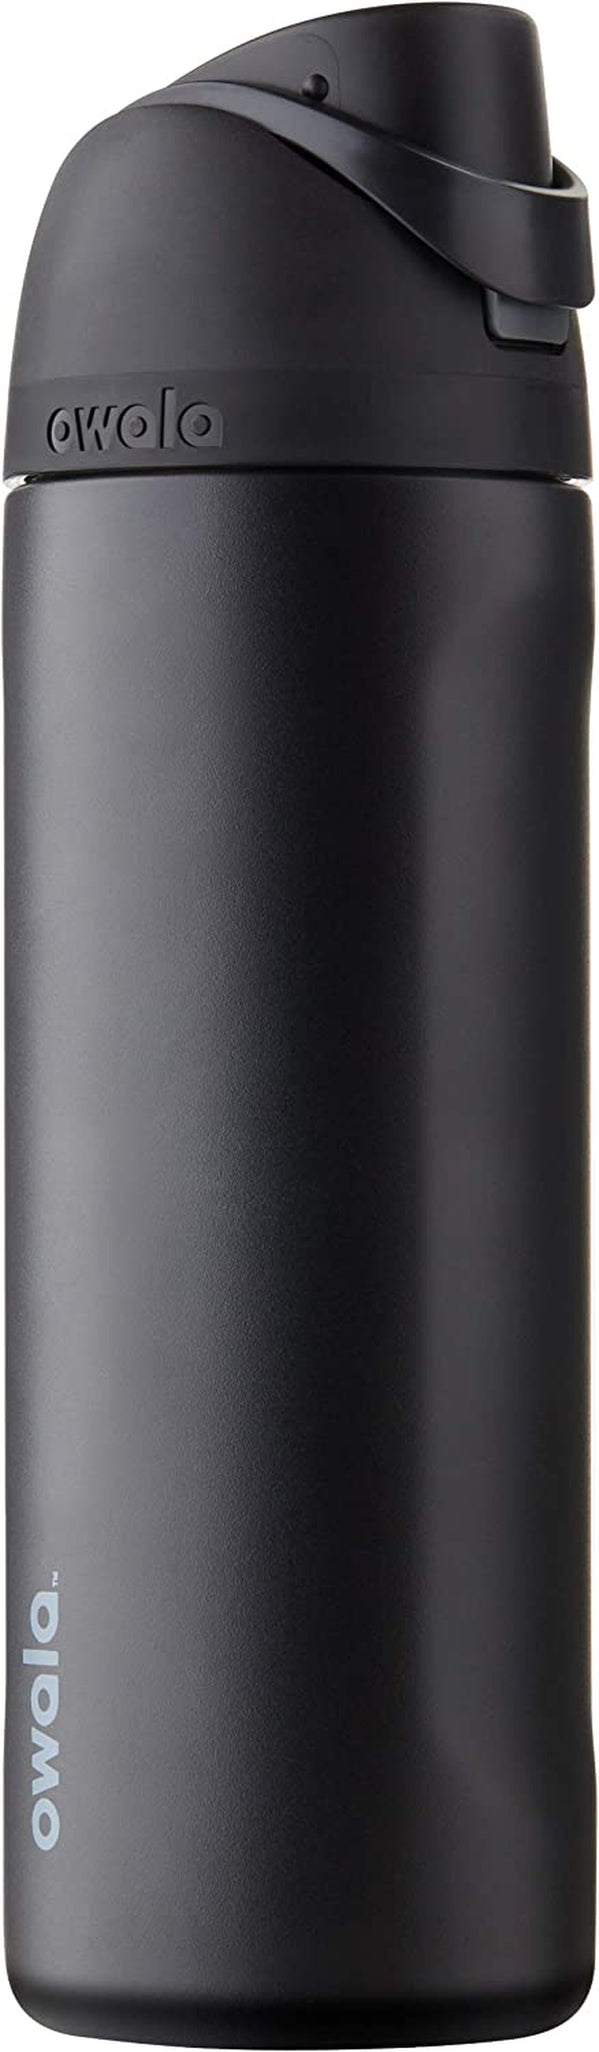 Freesip Insulated Stainless Steel Water Bottle with Straw for Sports and Travel, Bpa-Free, 24-Ounce, Very, Very Dark